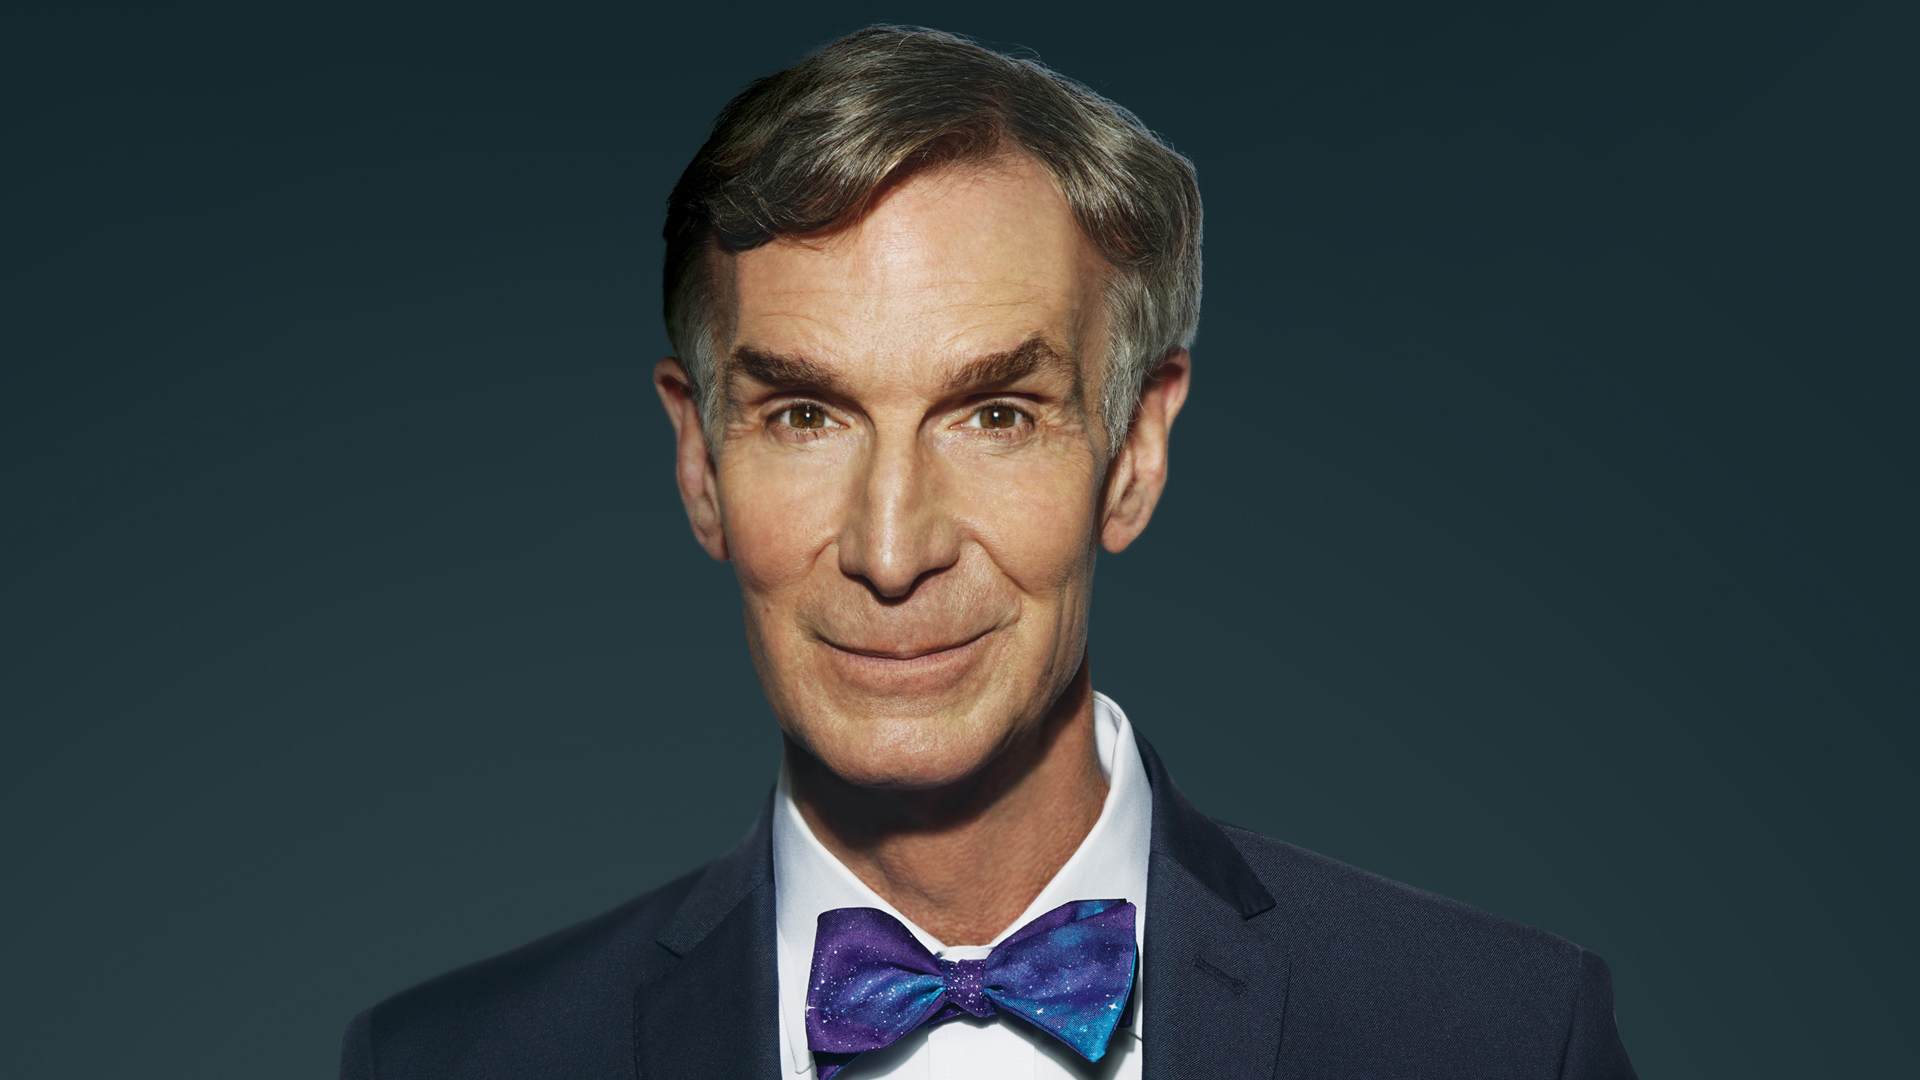 asshole celebrities - bill nye the science guy pbs